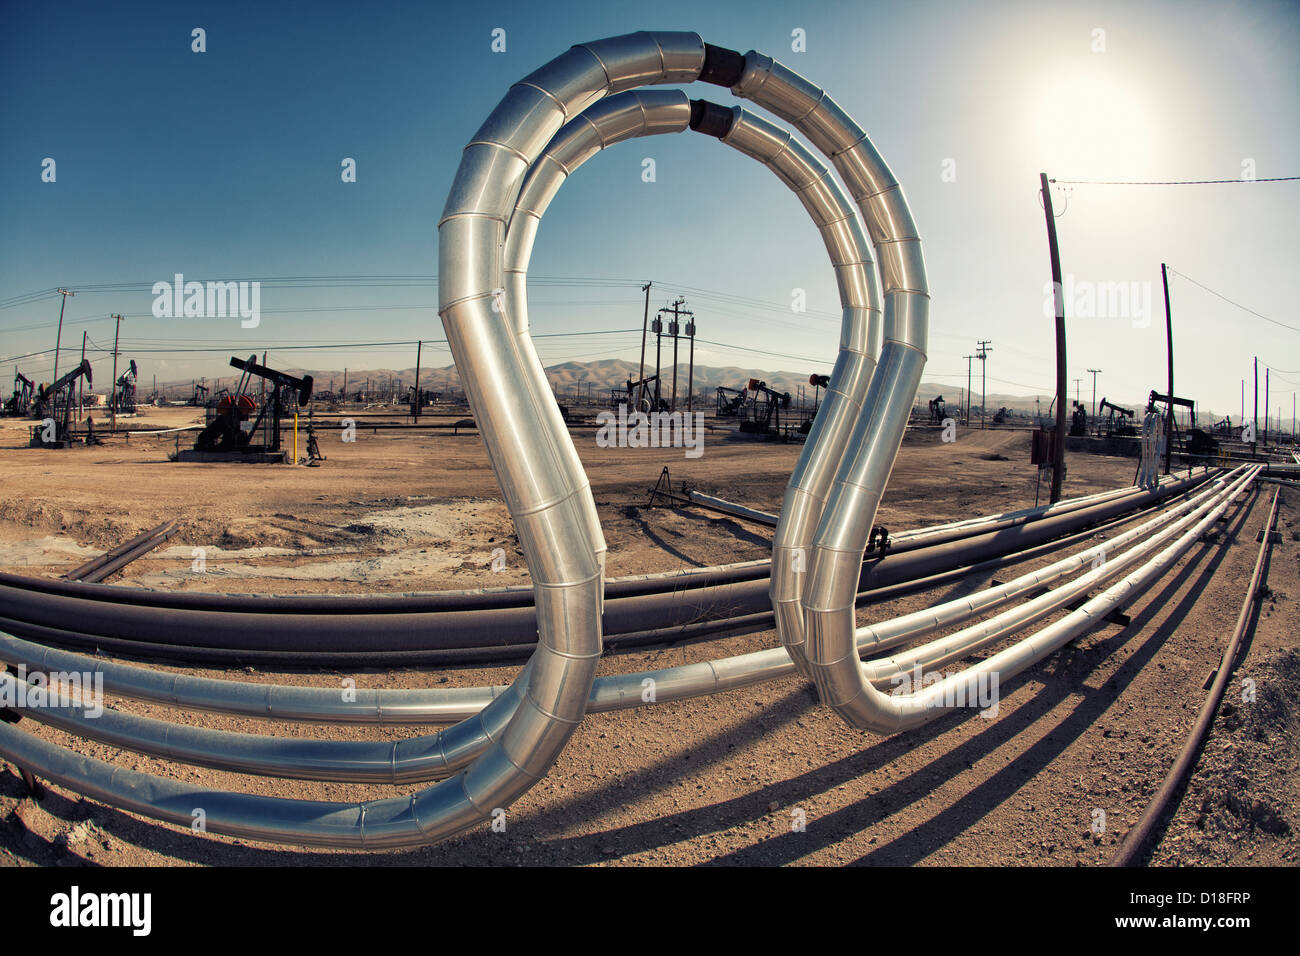 Curved pipes in oil field Stock Photo